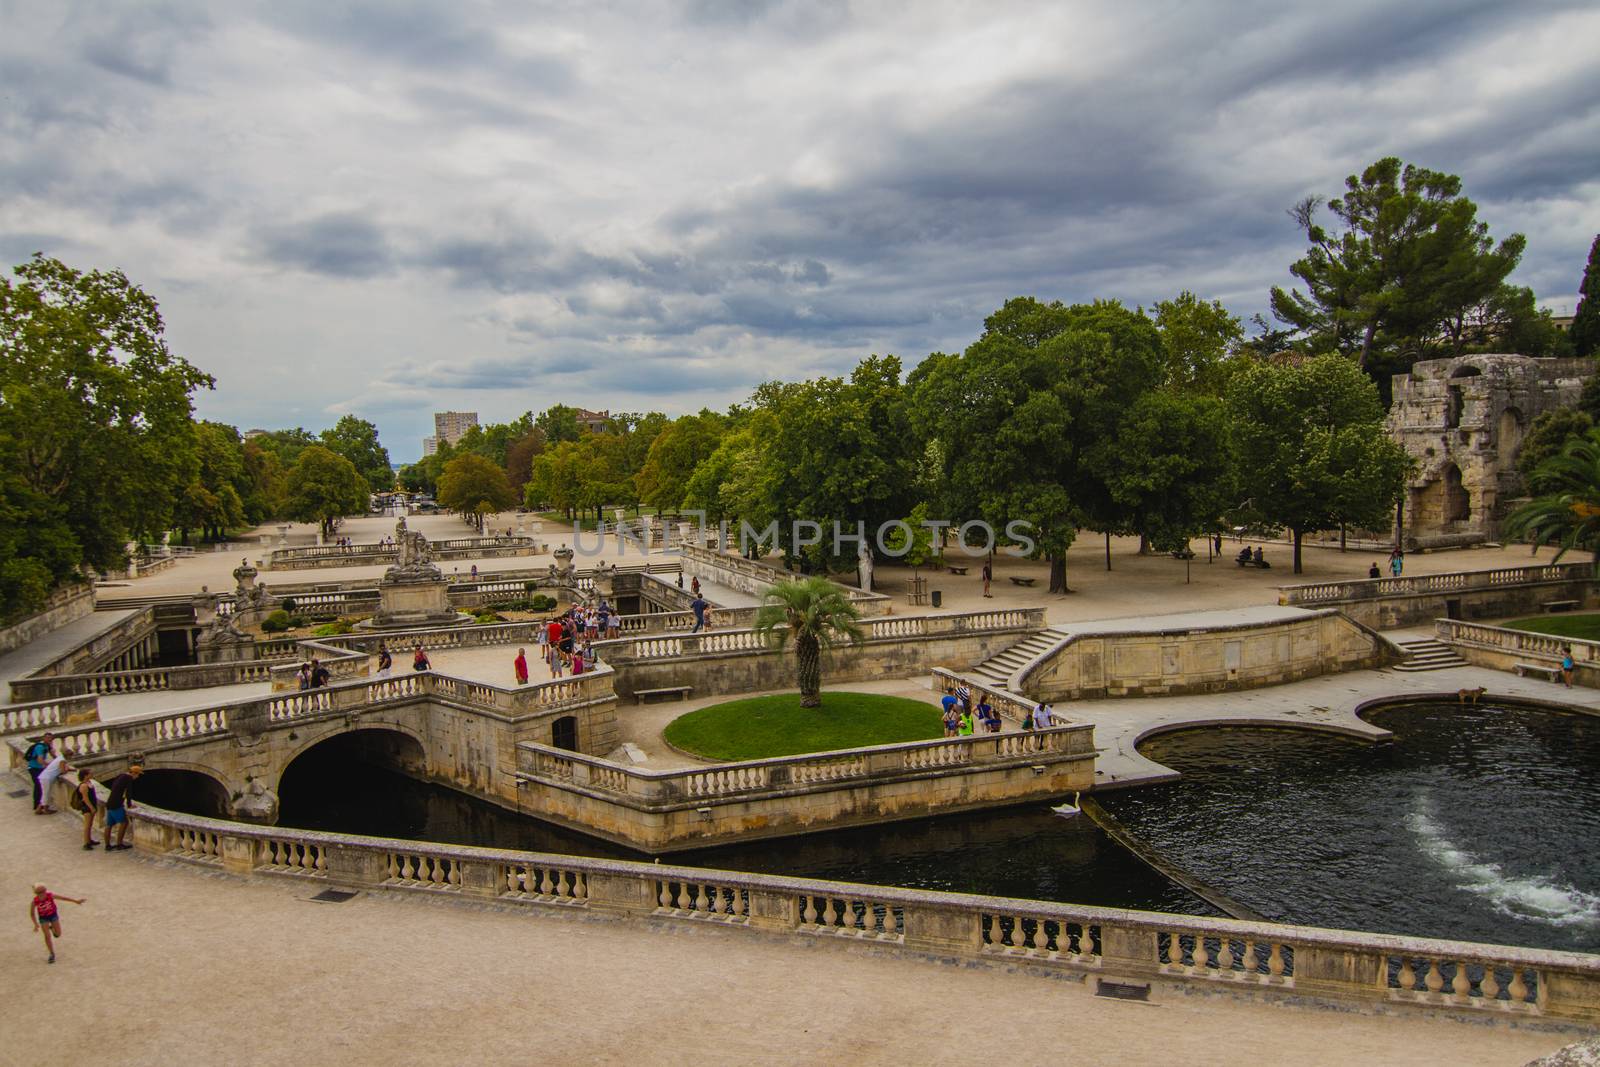 Garden of Fountains in Nimes France